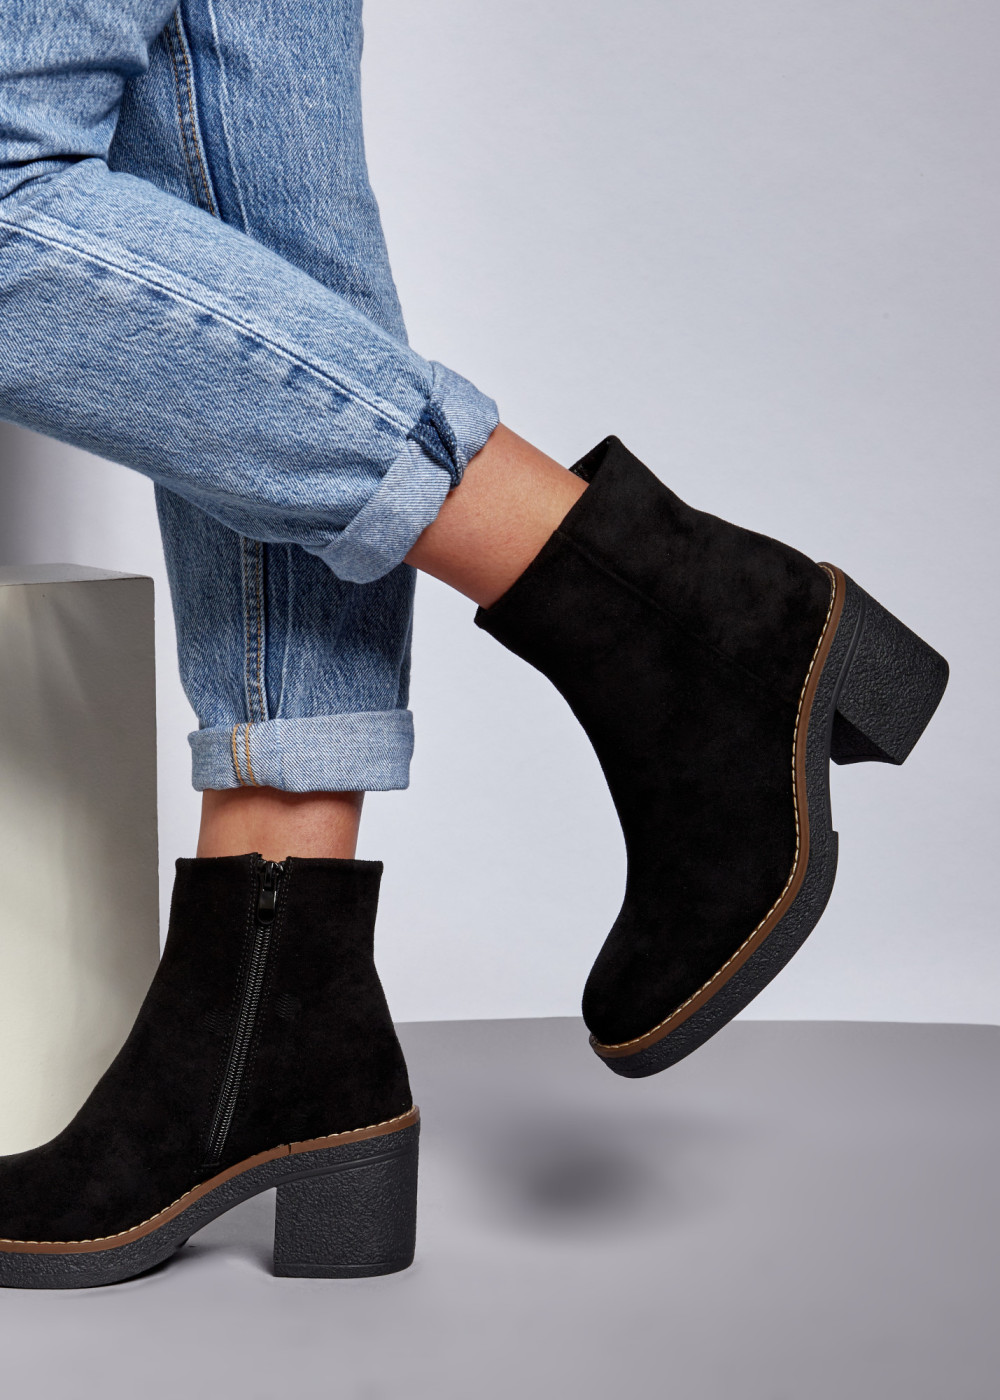 Women's Boots | Leather, Chelsea & Black Boots | ASOS